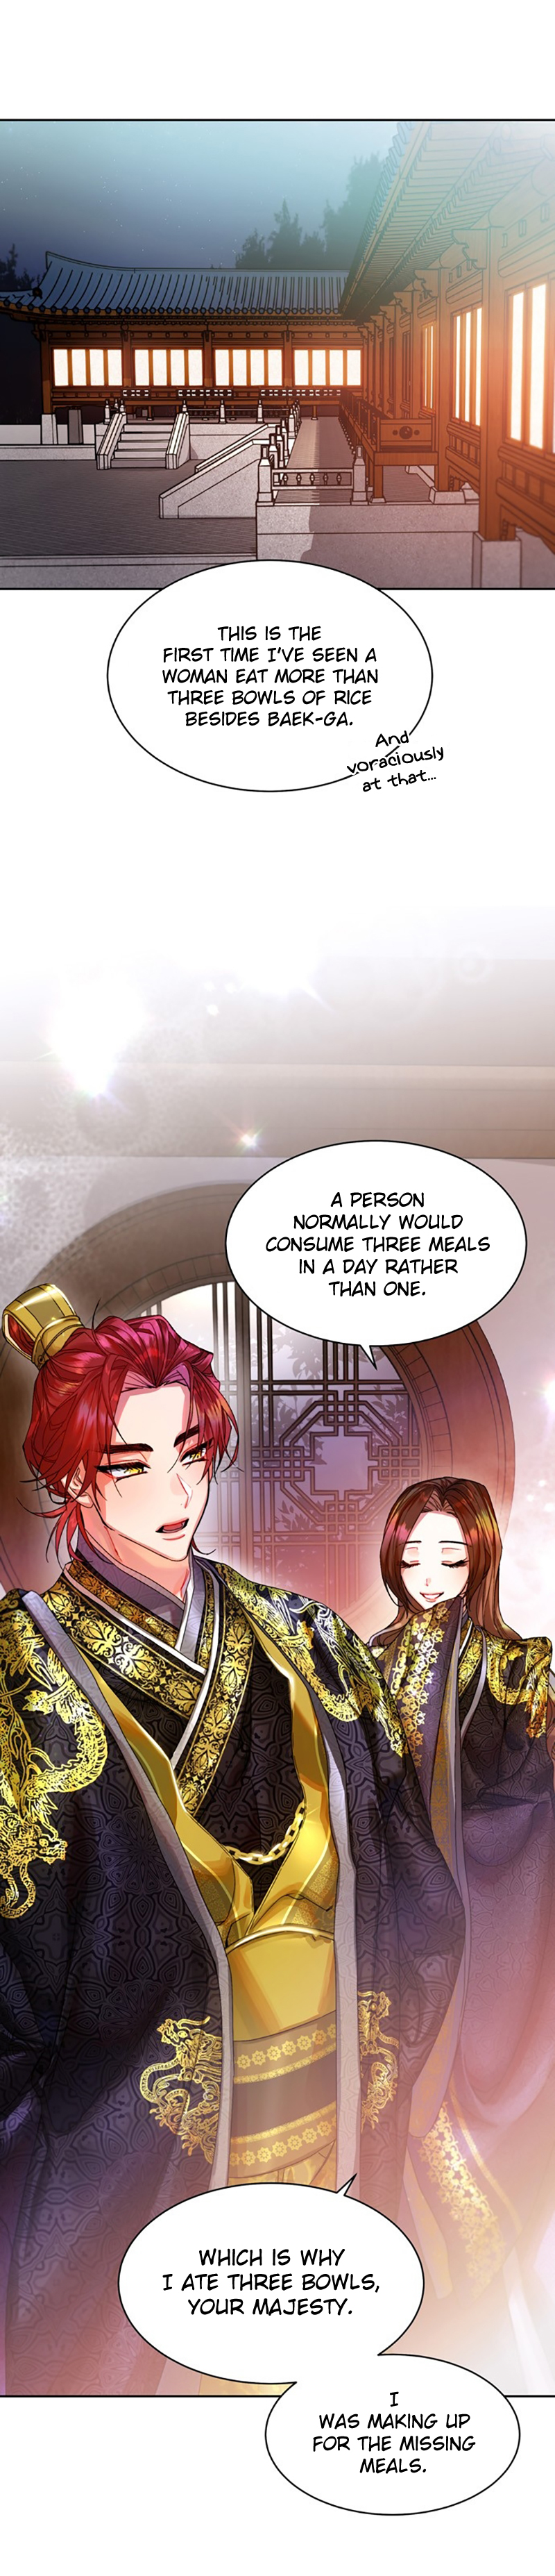 What Kind Of Empress Is This - Page 2